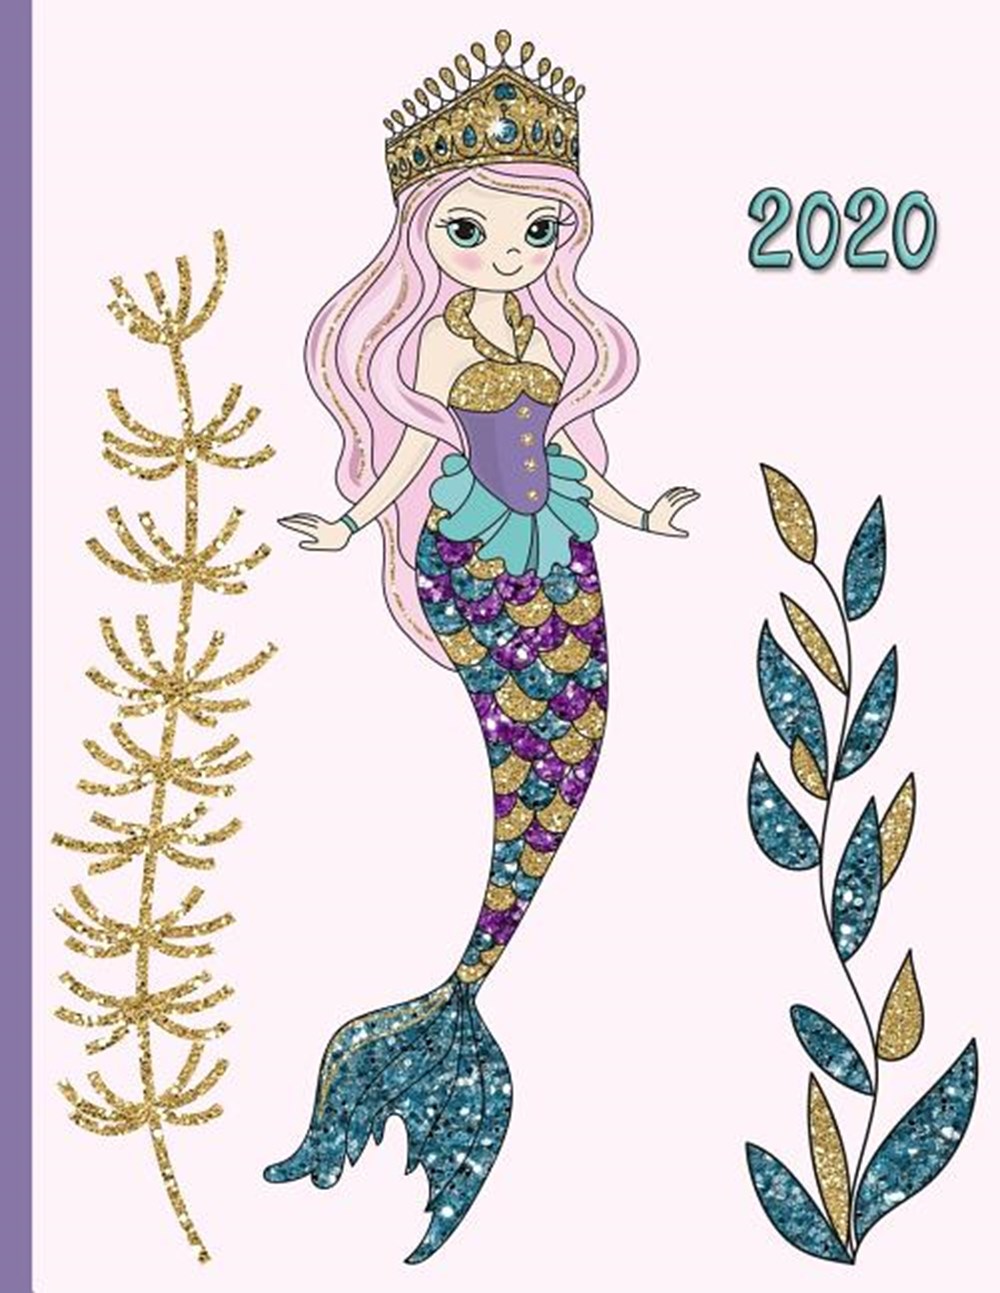 Glitter Mermaid in the Sea with Seaweed Kelp and Colorful Fish 2020 Schedule Planner and Organizer /